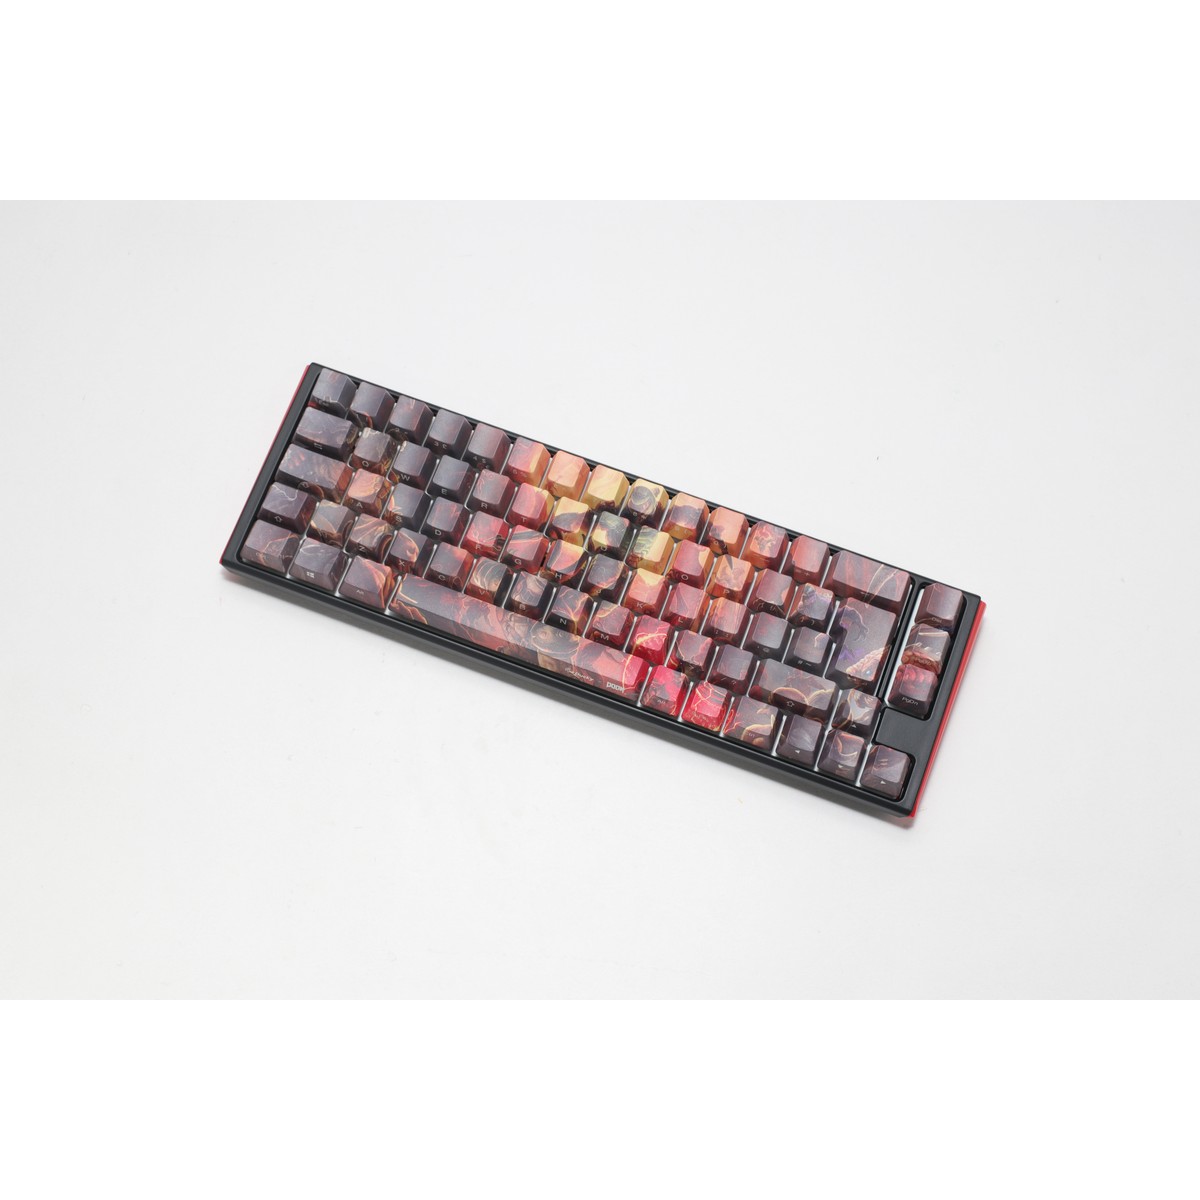 Ducky - Ducky x DOOM SF 65% Gaming Keyboard Limited Edition Cherry MX Blue Switches UK L